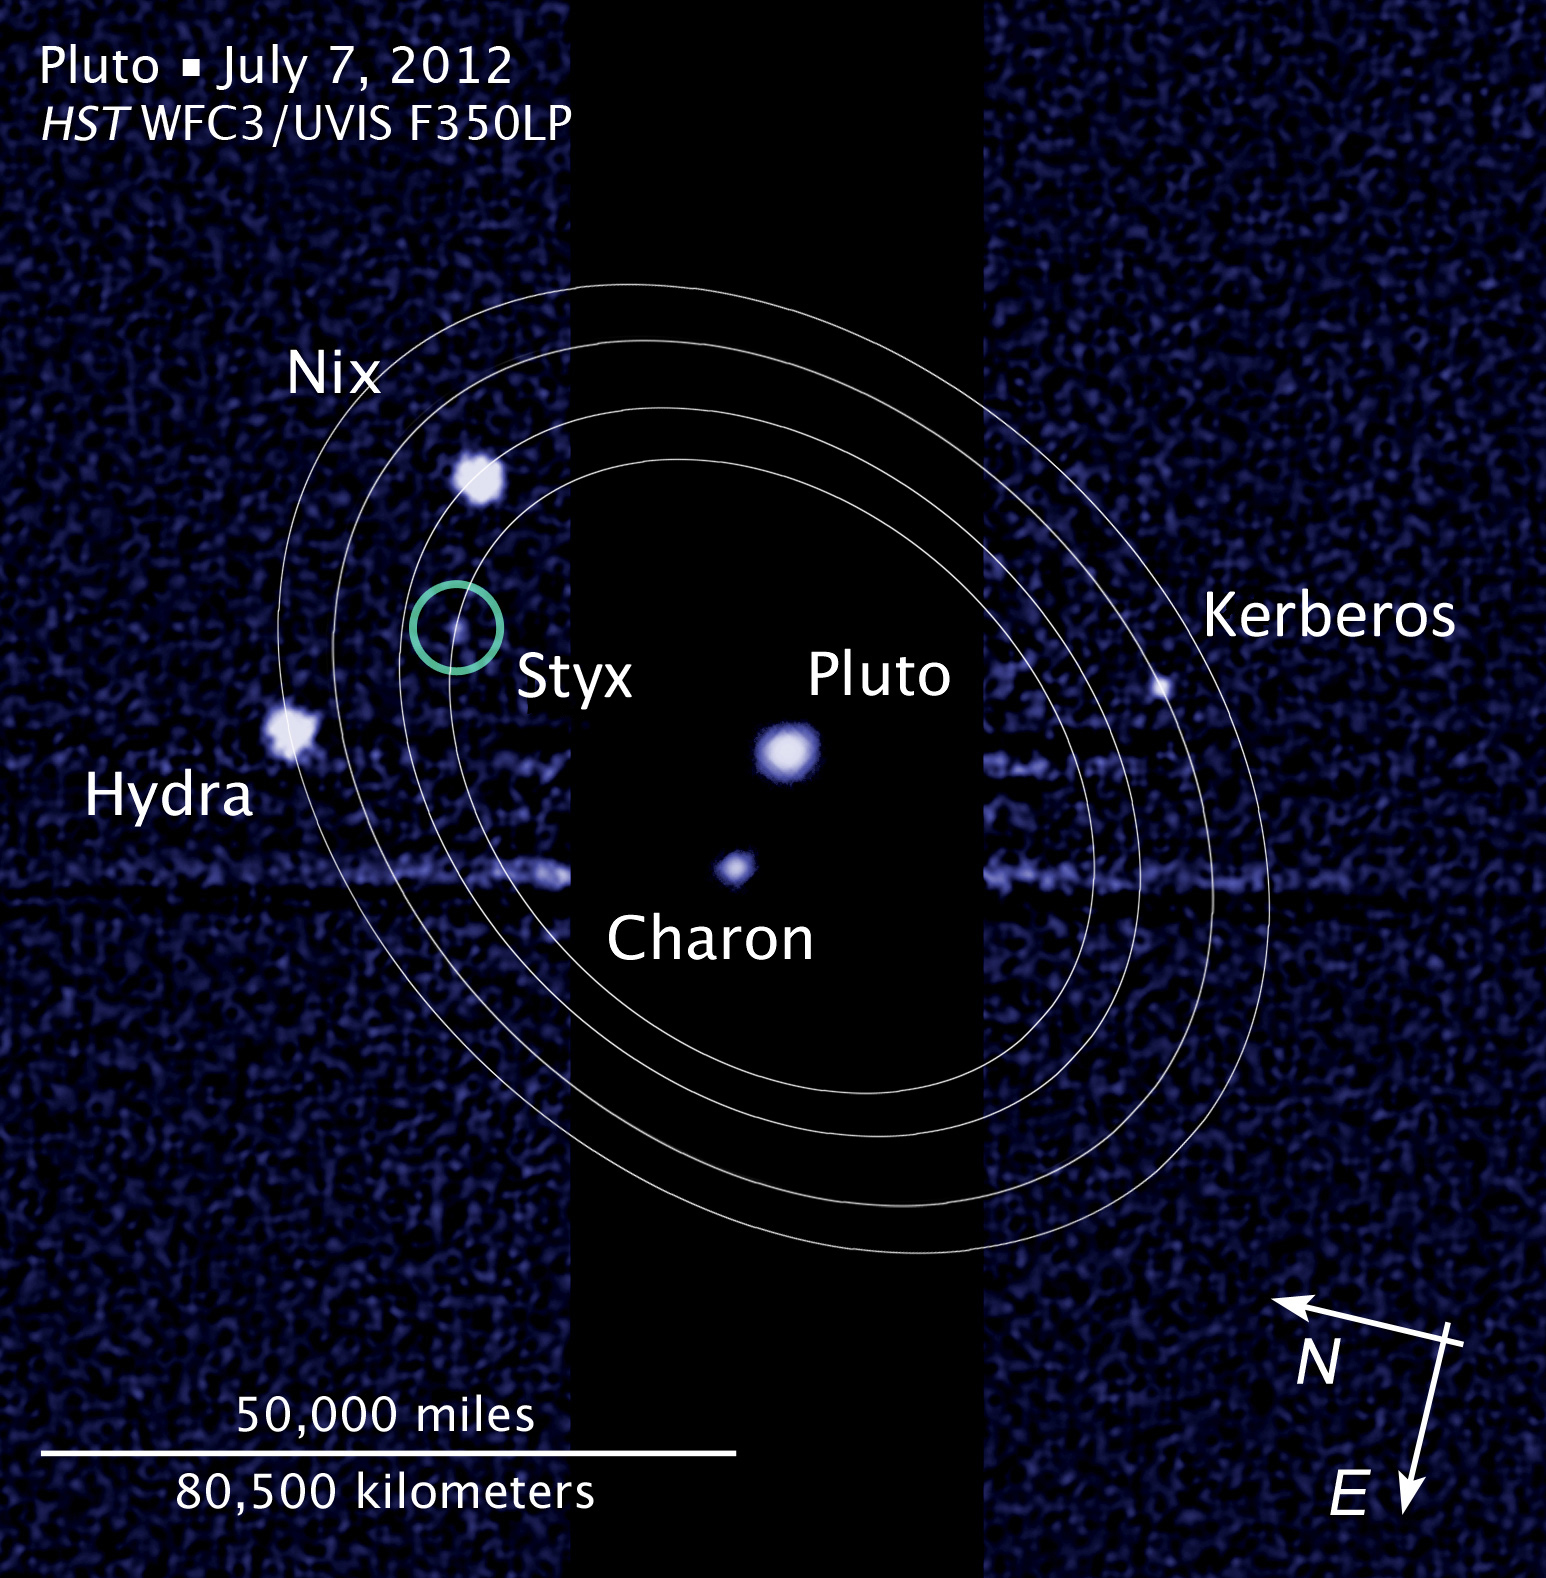 Figure 5: Discovery image of Pluto’s tiny moon Styx in 2012, overlaid with orbits of the satellite system, which gave cause for concern to the Pluto Encounter Planning (PEP) Team. Credit: NASA/ESA/L. Frattare (STScI)